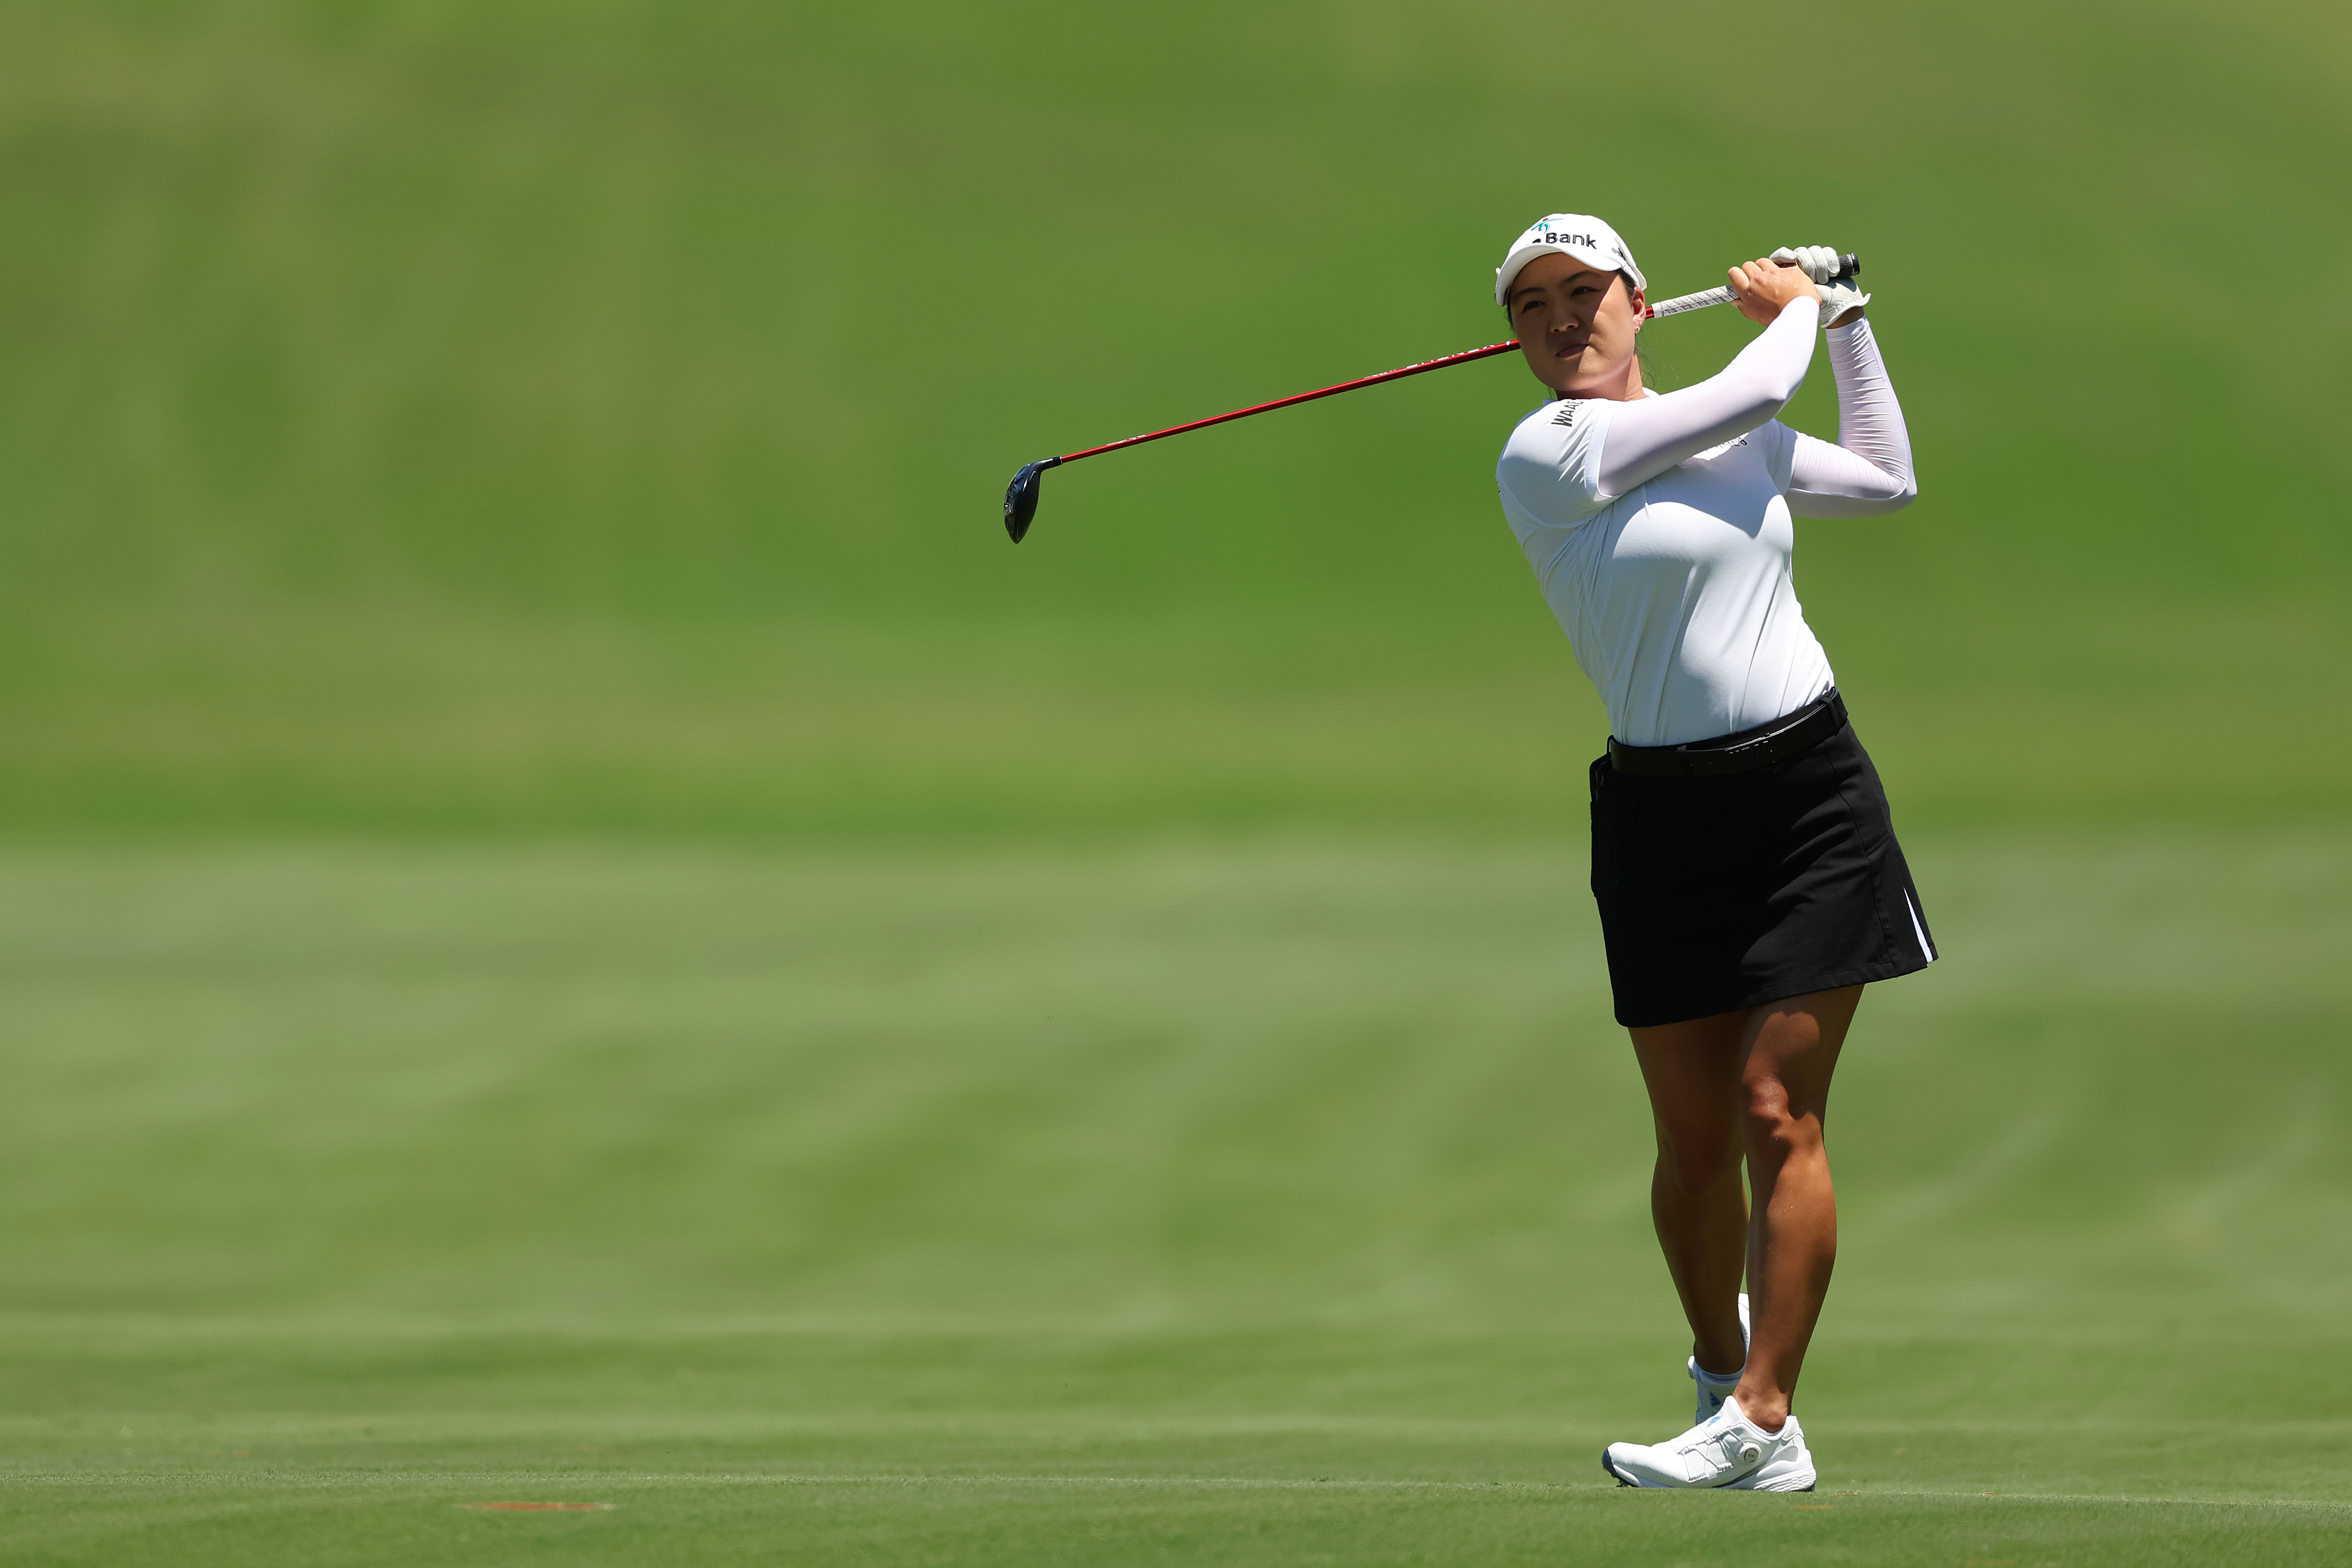 Golf Australia are among the first sports to take part in the revised Wellbeing Health Check.
(Pictured: Australian Golfer Minjee Lee)